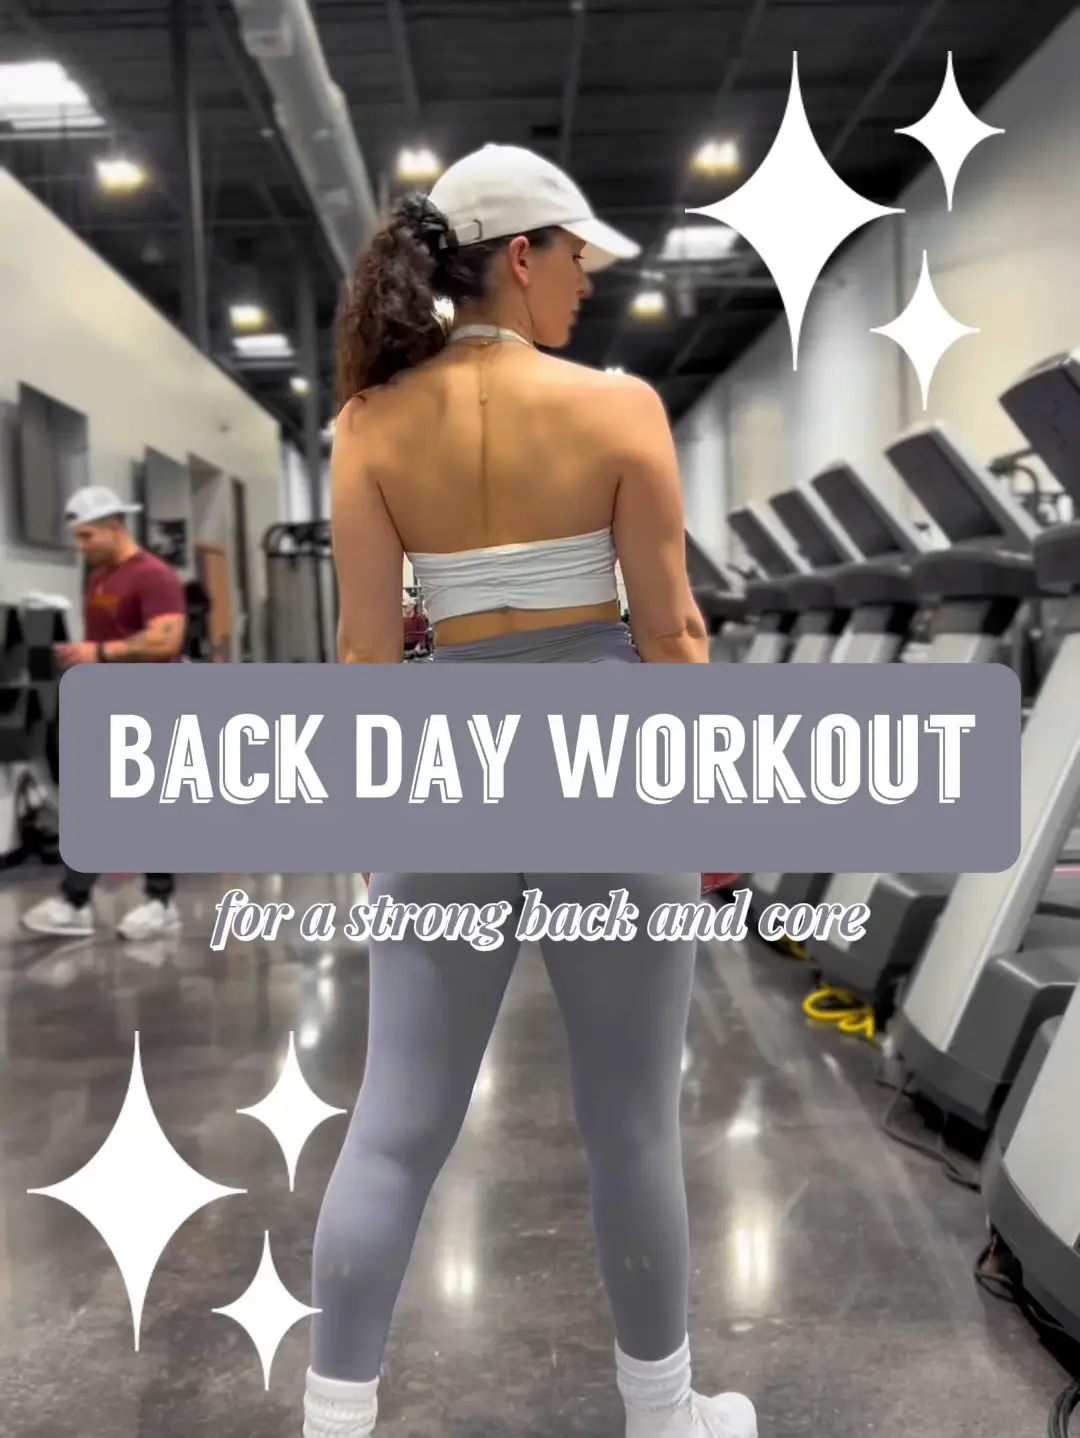 Back day workout